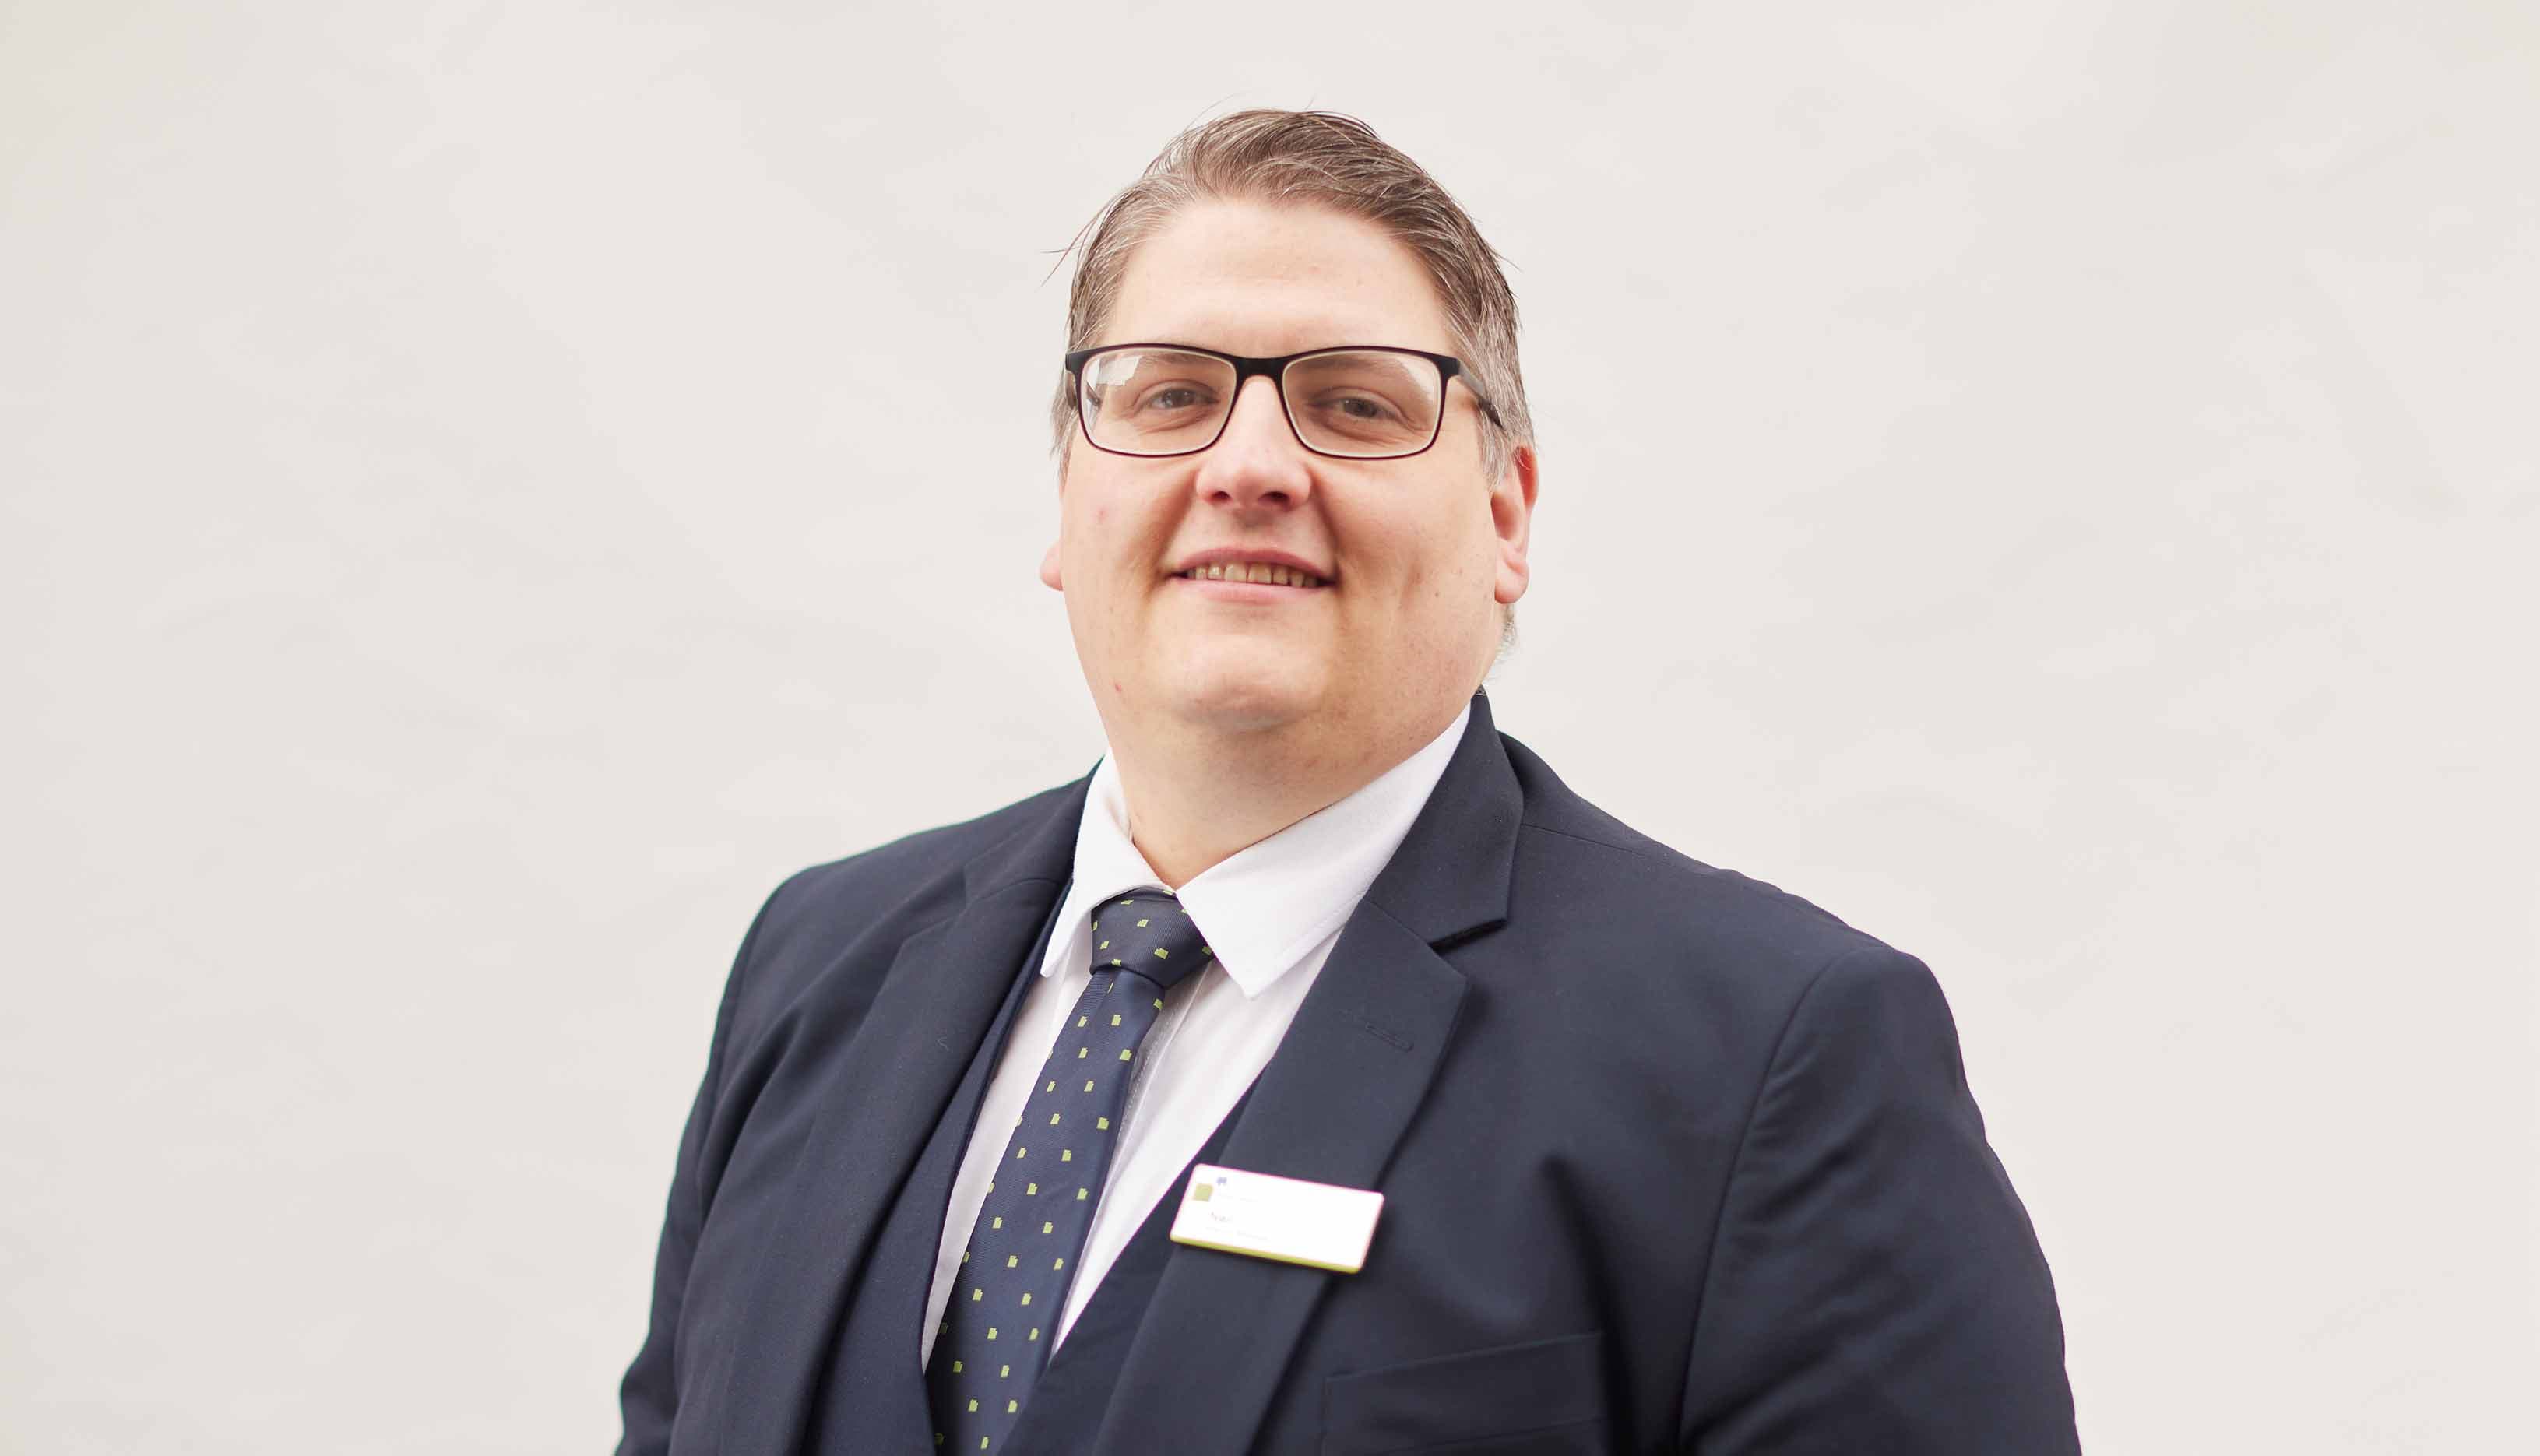 Whitely Bay's Branch Manager, Neil, stood with a white background smiling. 